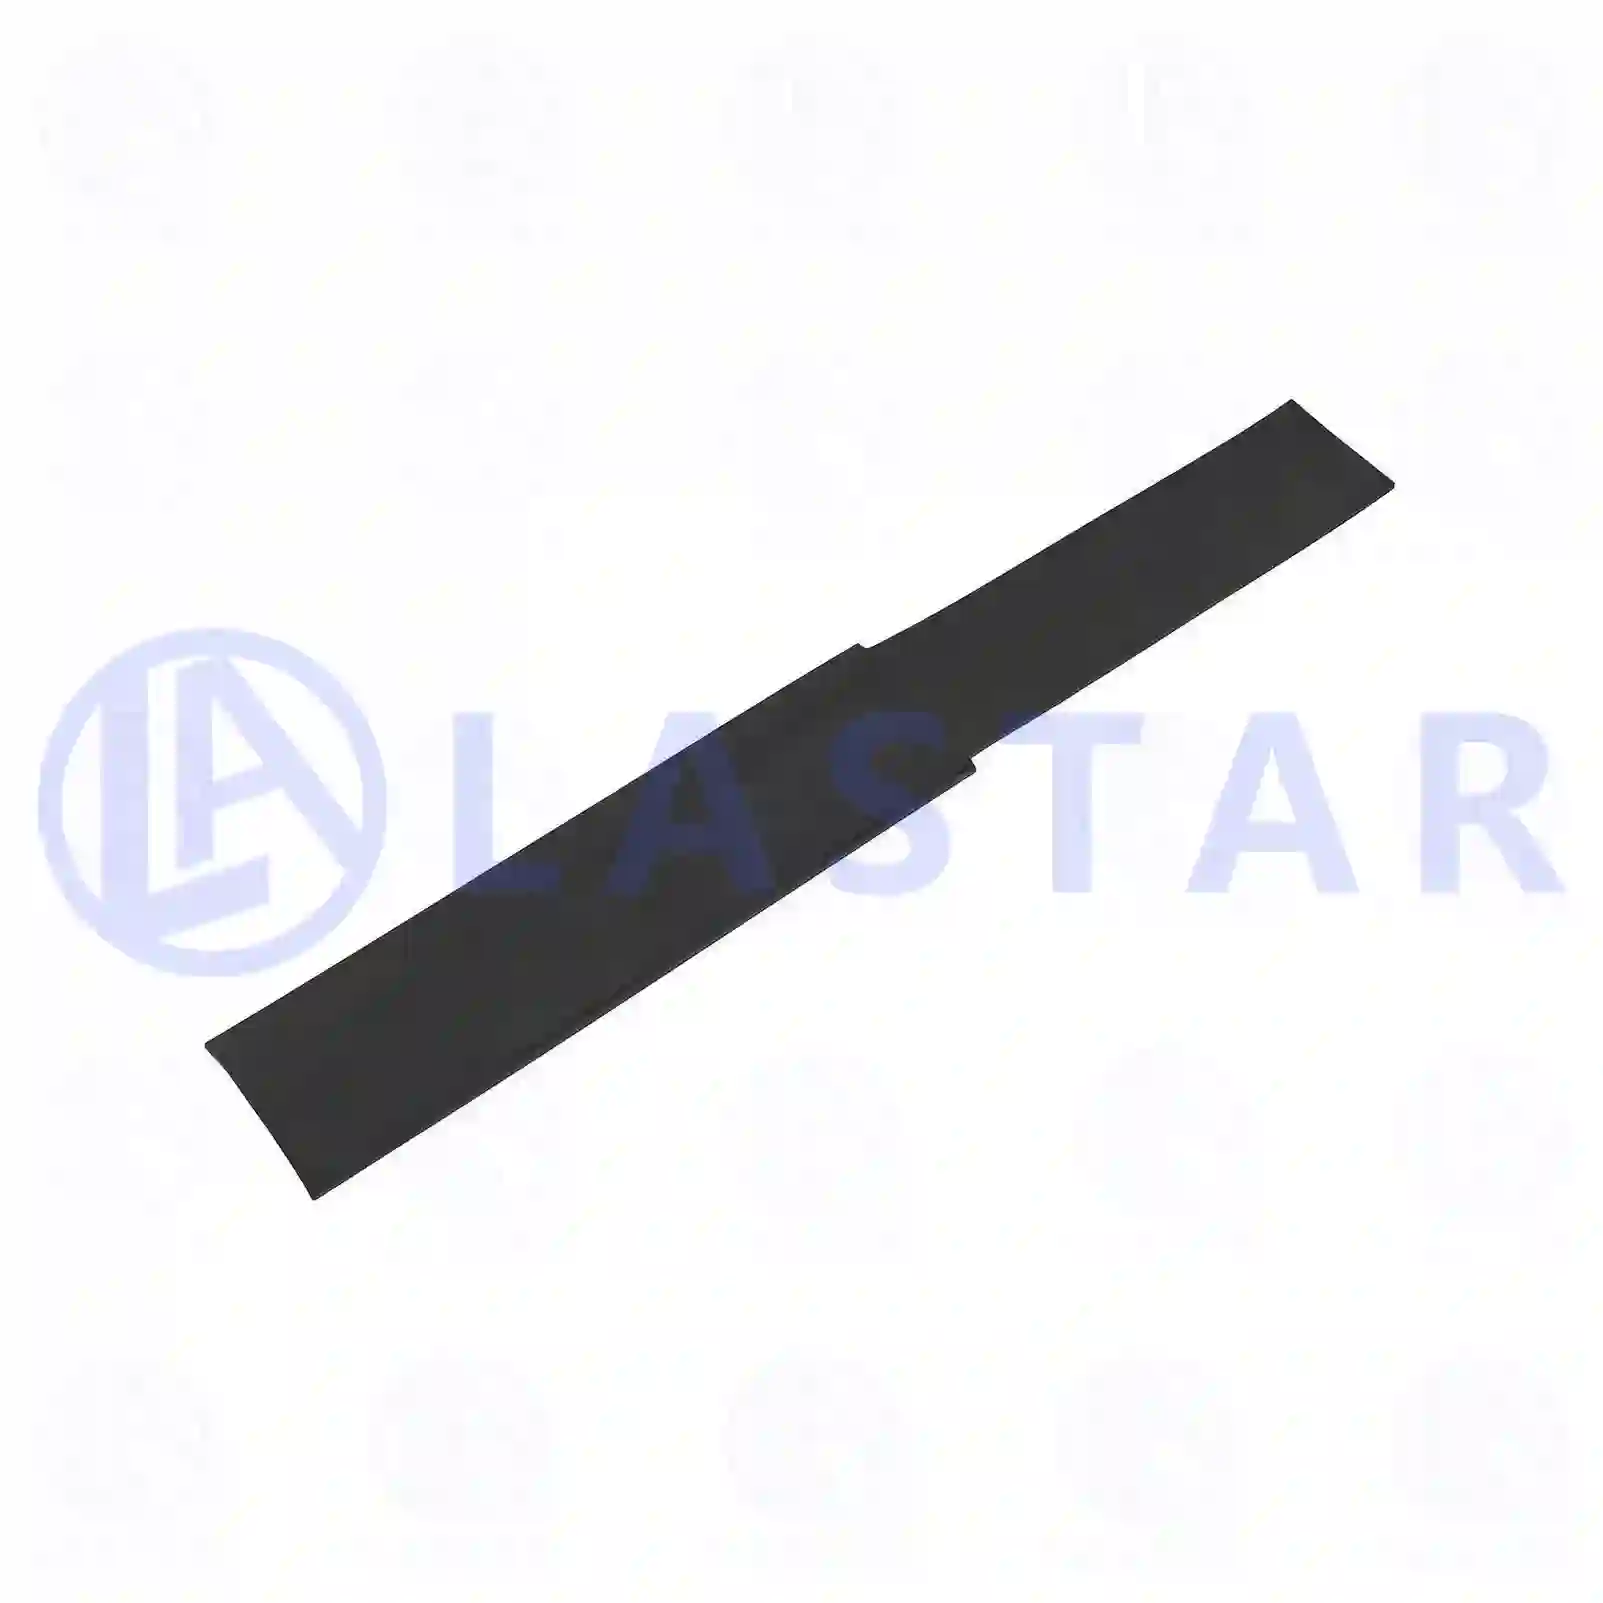  Tensioning band || Lastar Spare Part | Truck Spare Parts, Auotomotive Spare Parts